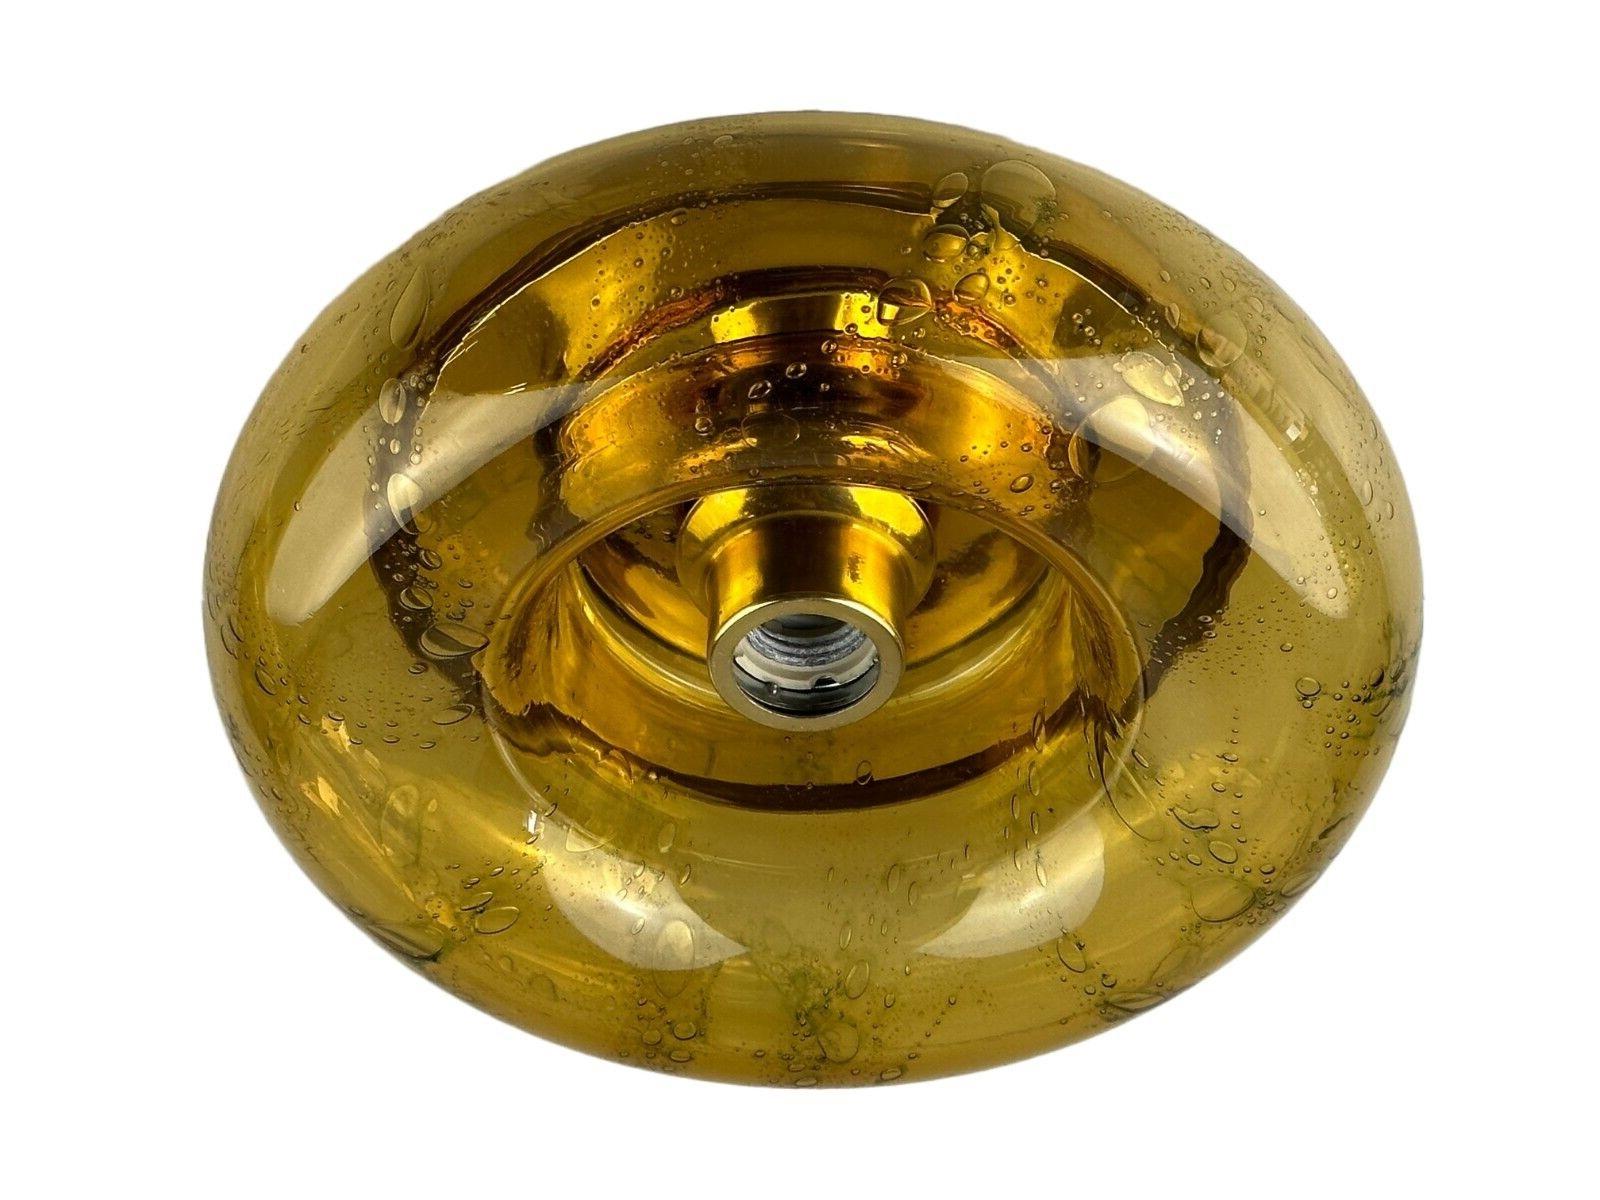 60s 70s ceiling lamp Plafoniere Ice Glas Doria Leuchten Germany Space Age

Object: plafoniere

Manufacturer: Doria lights

Condition: good - vintage

Age: around 1960-1970

Dimensions:

Diameter = 27.5cm
Height = 10cm

Other notes:

E27 socket

The